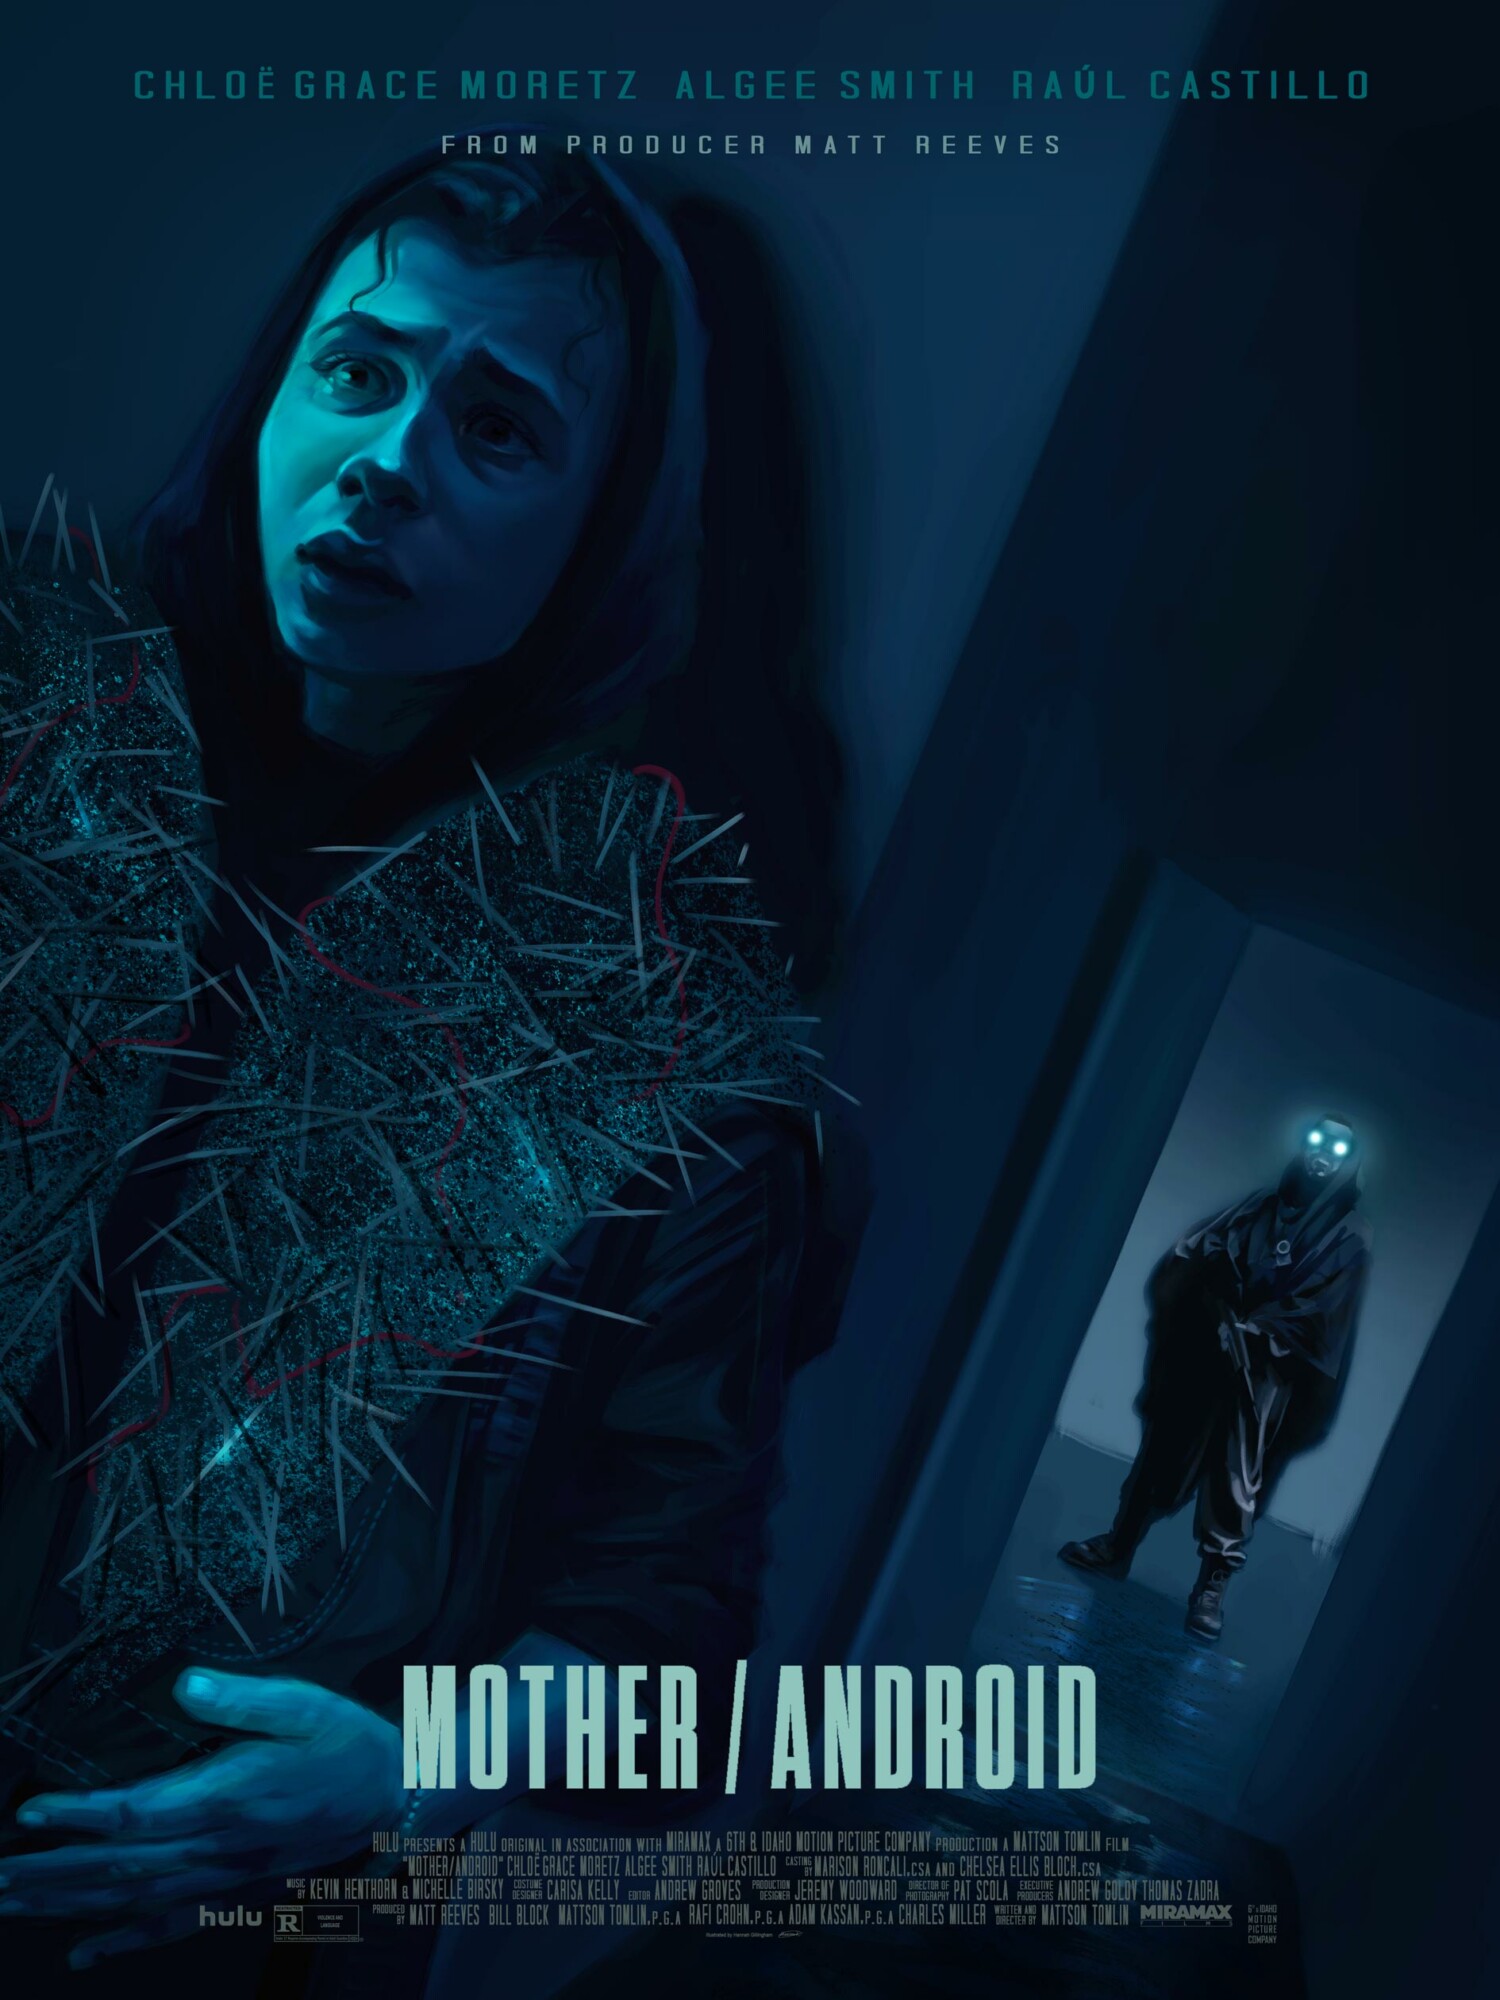 MOTHER/ANDROID